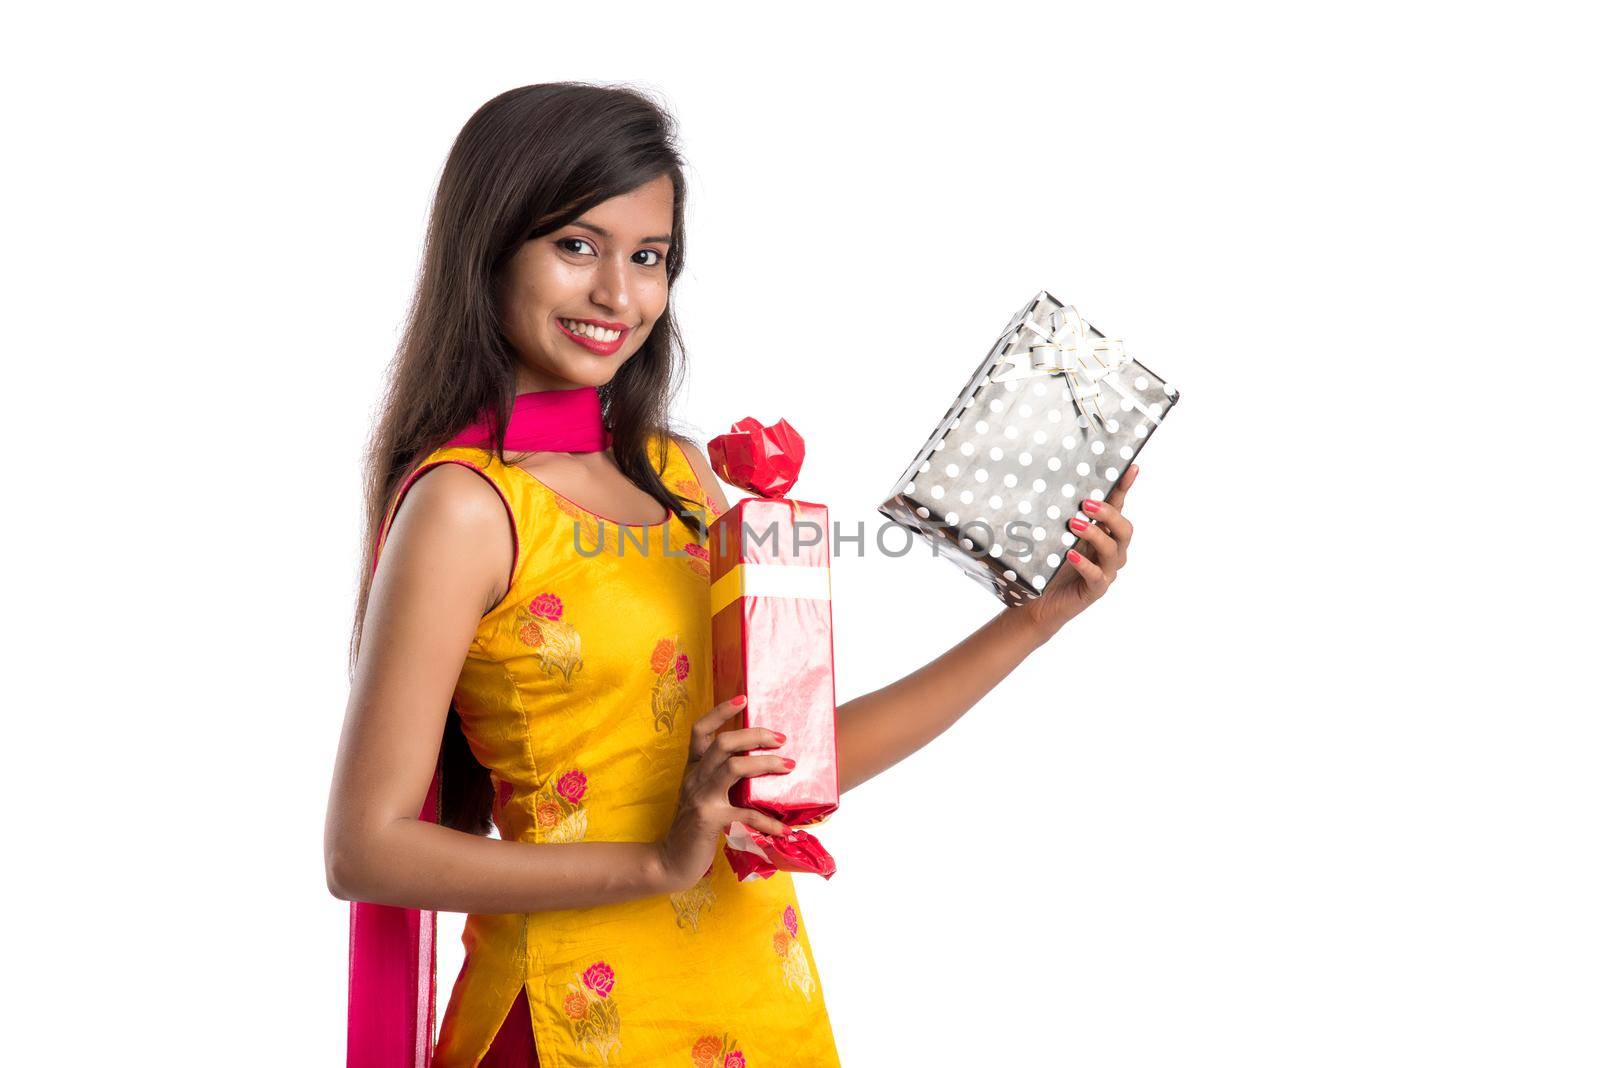 Portrait of young happy smiling Indian Girl holding gift boxes on a white background. by DipakShelare